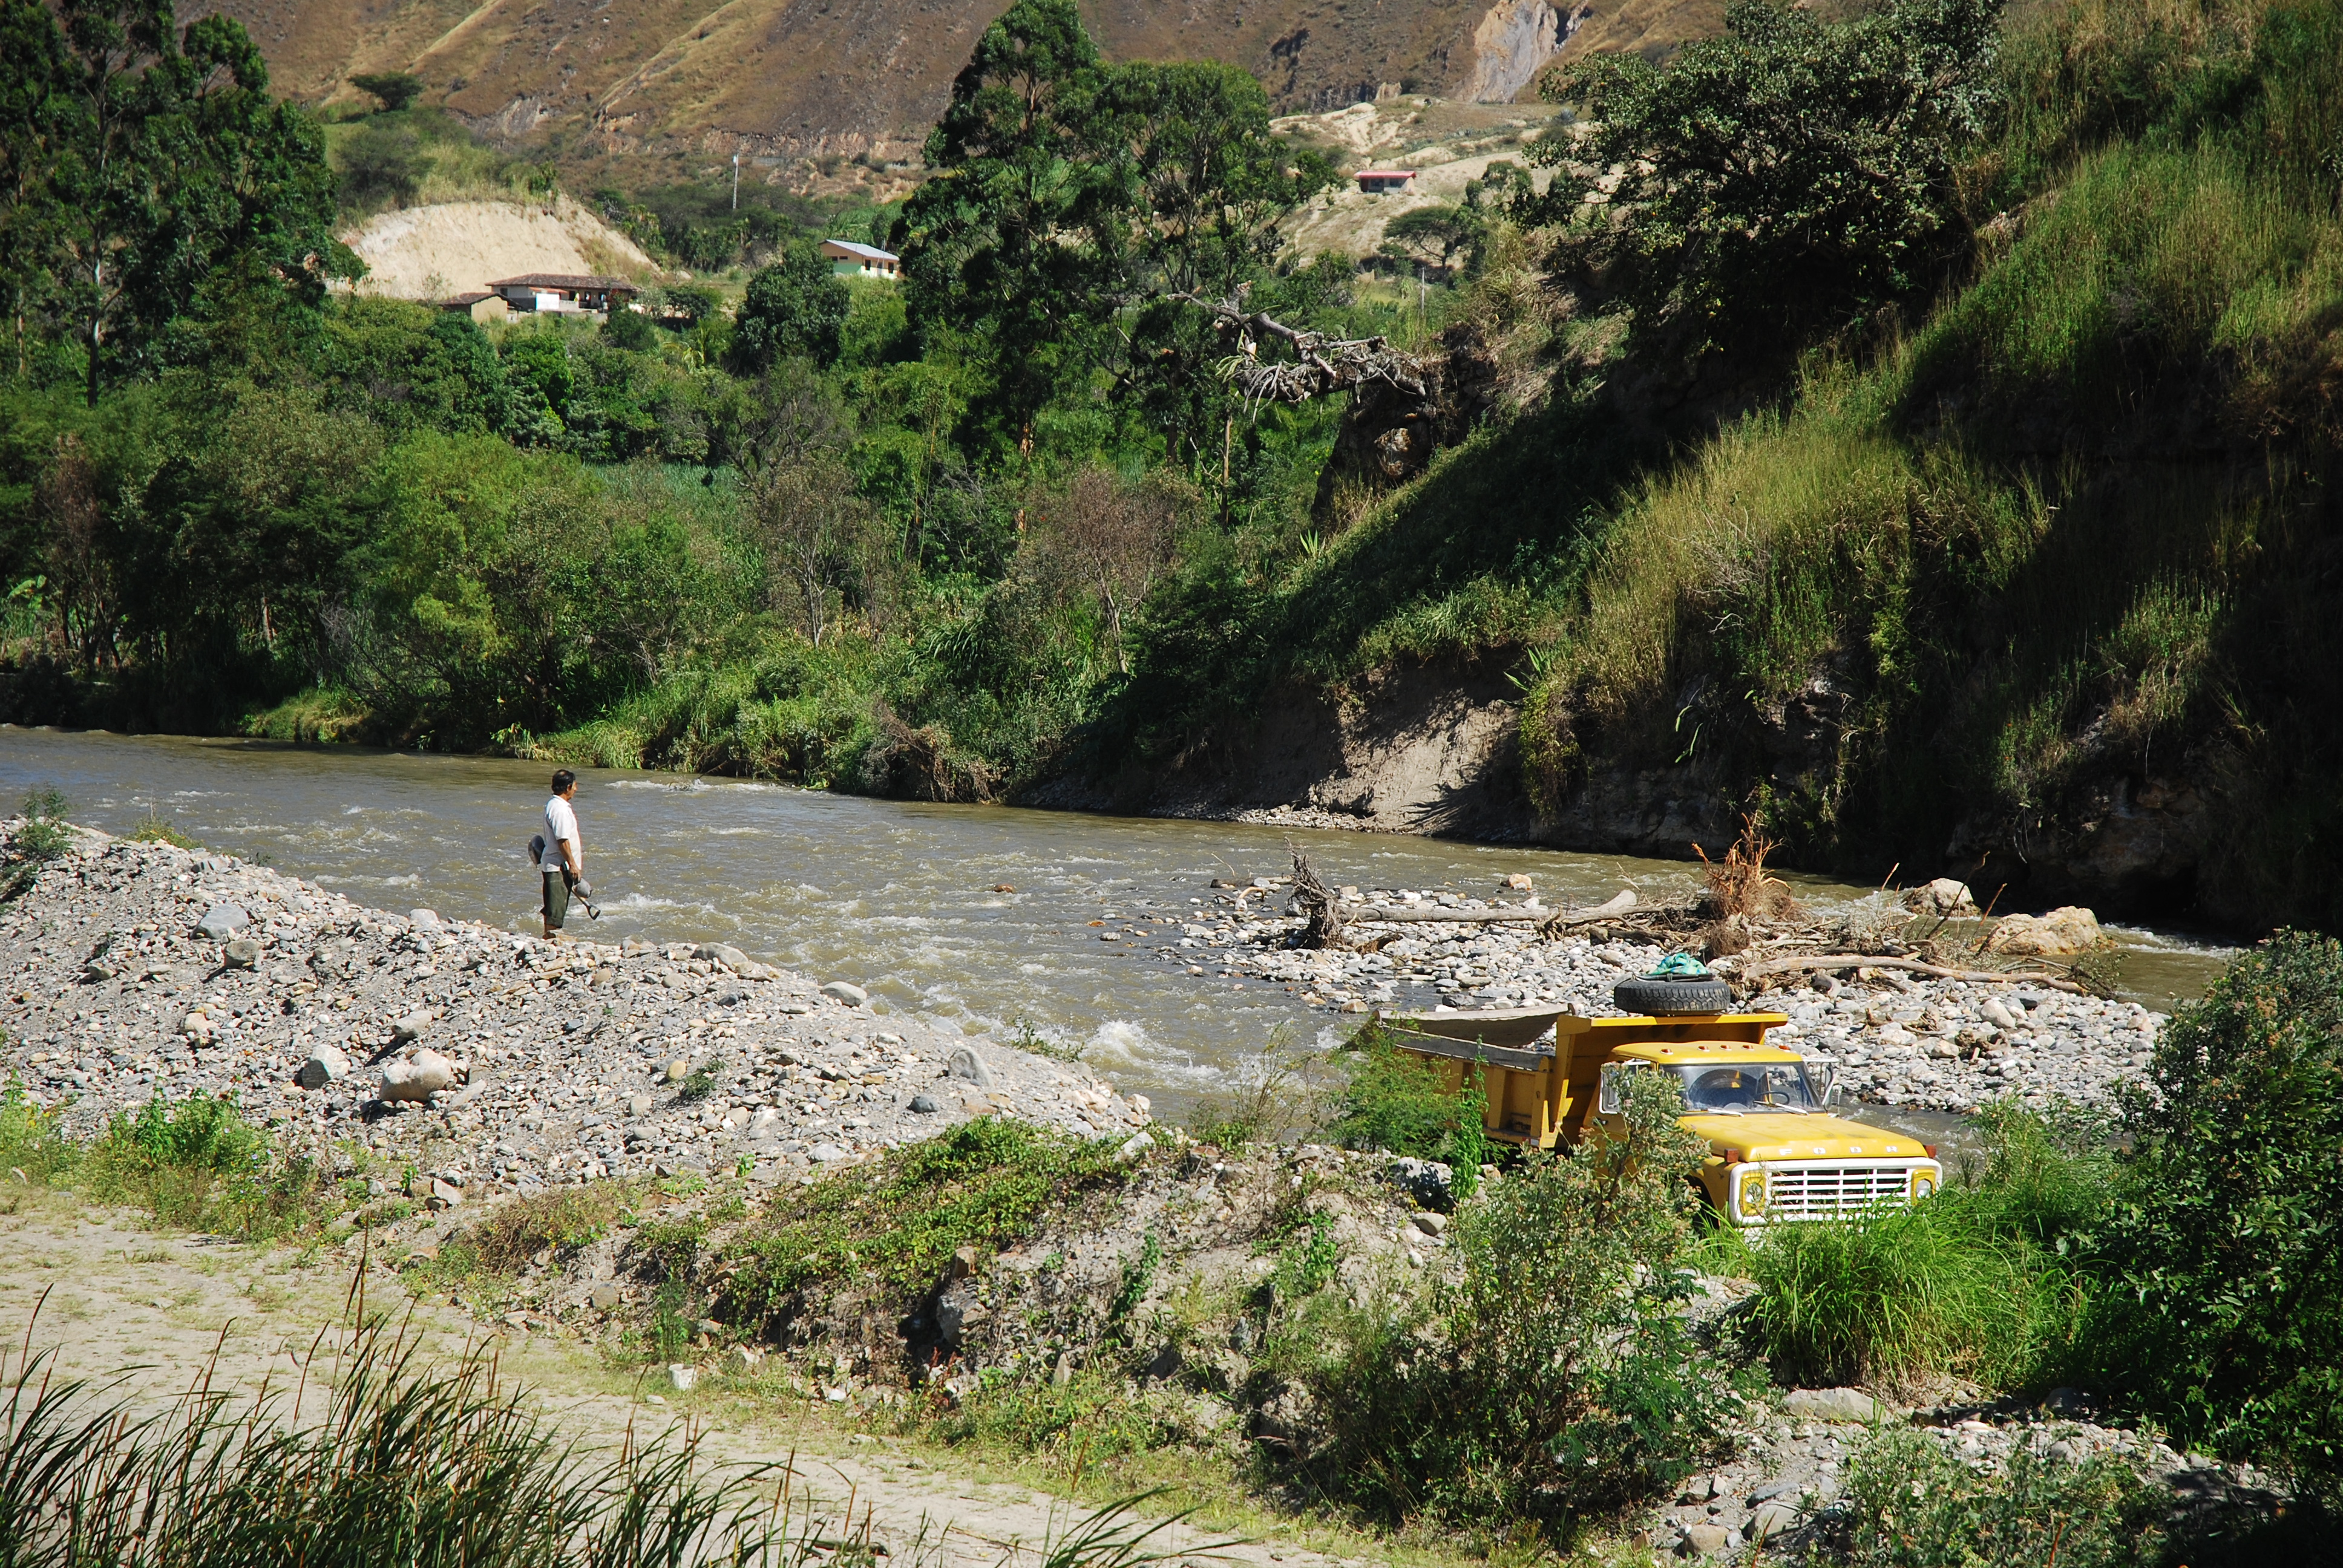 Harvesting rocks from the Vilcabamba River near the town of Quinara. Photo credit: Chris Hebdon